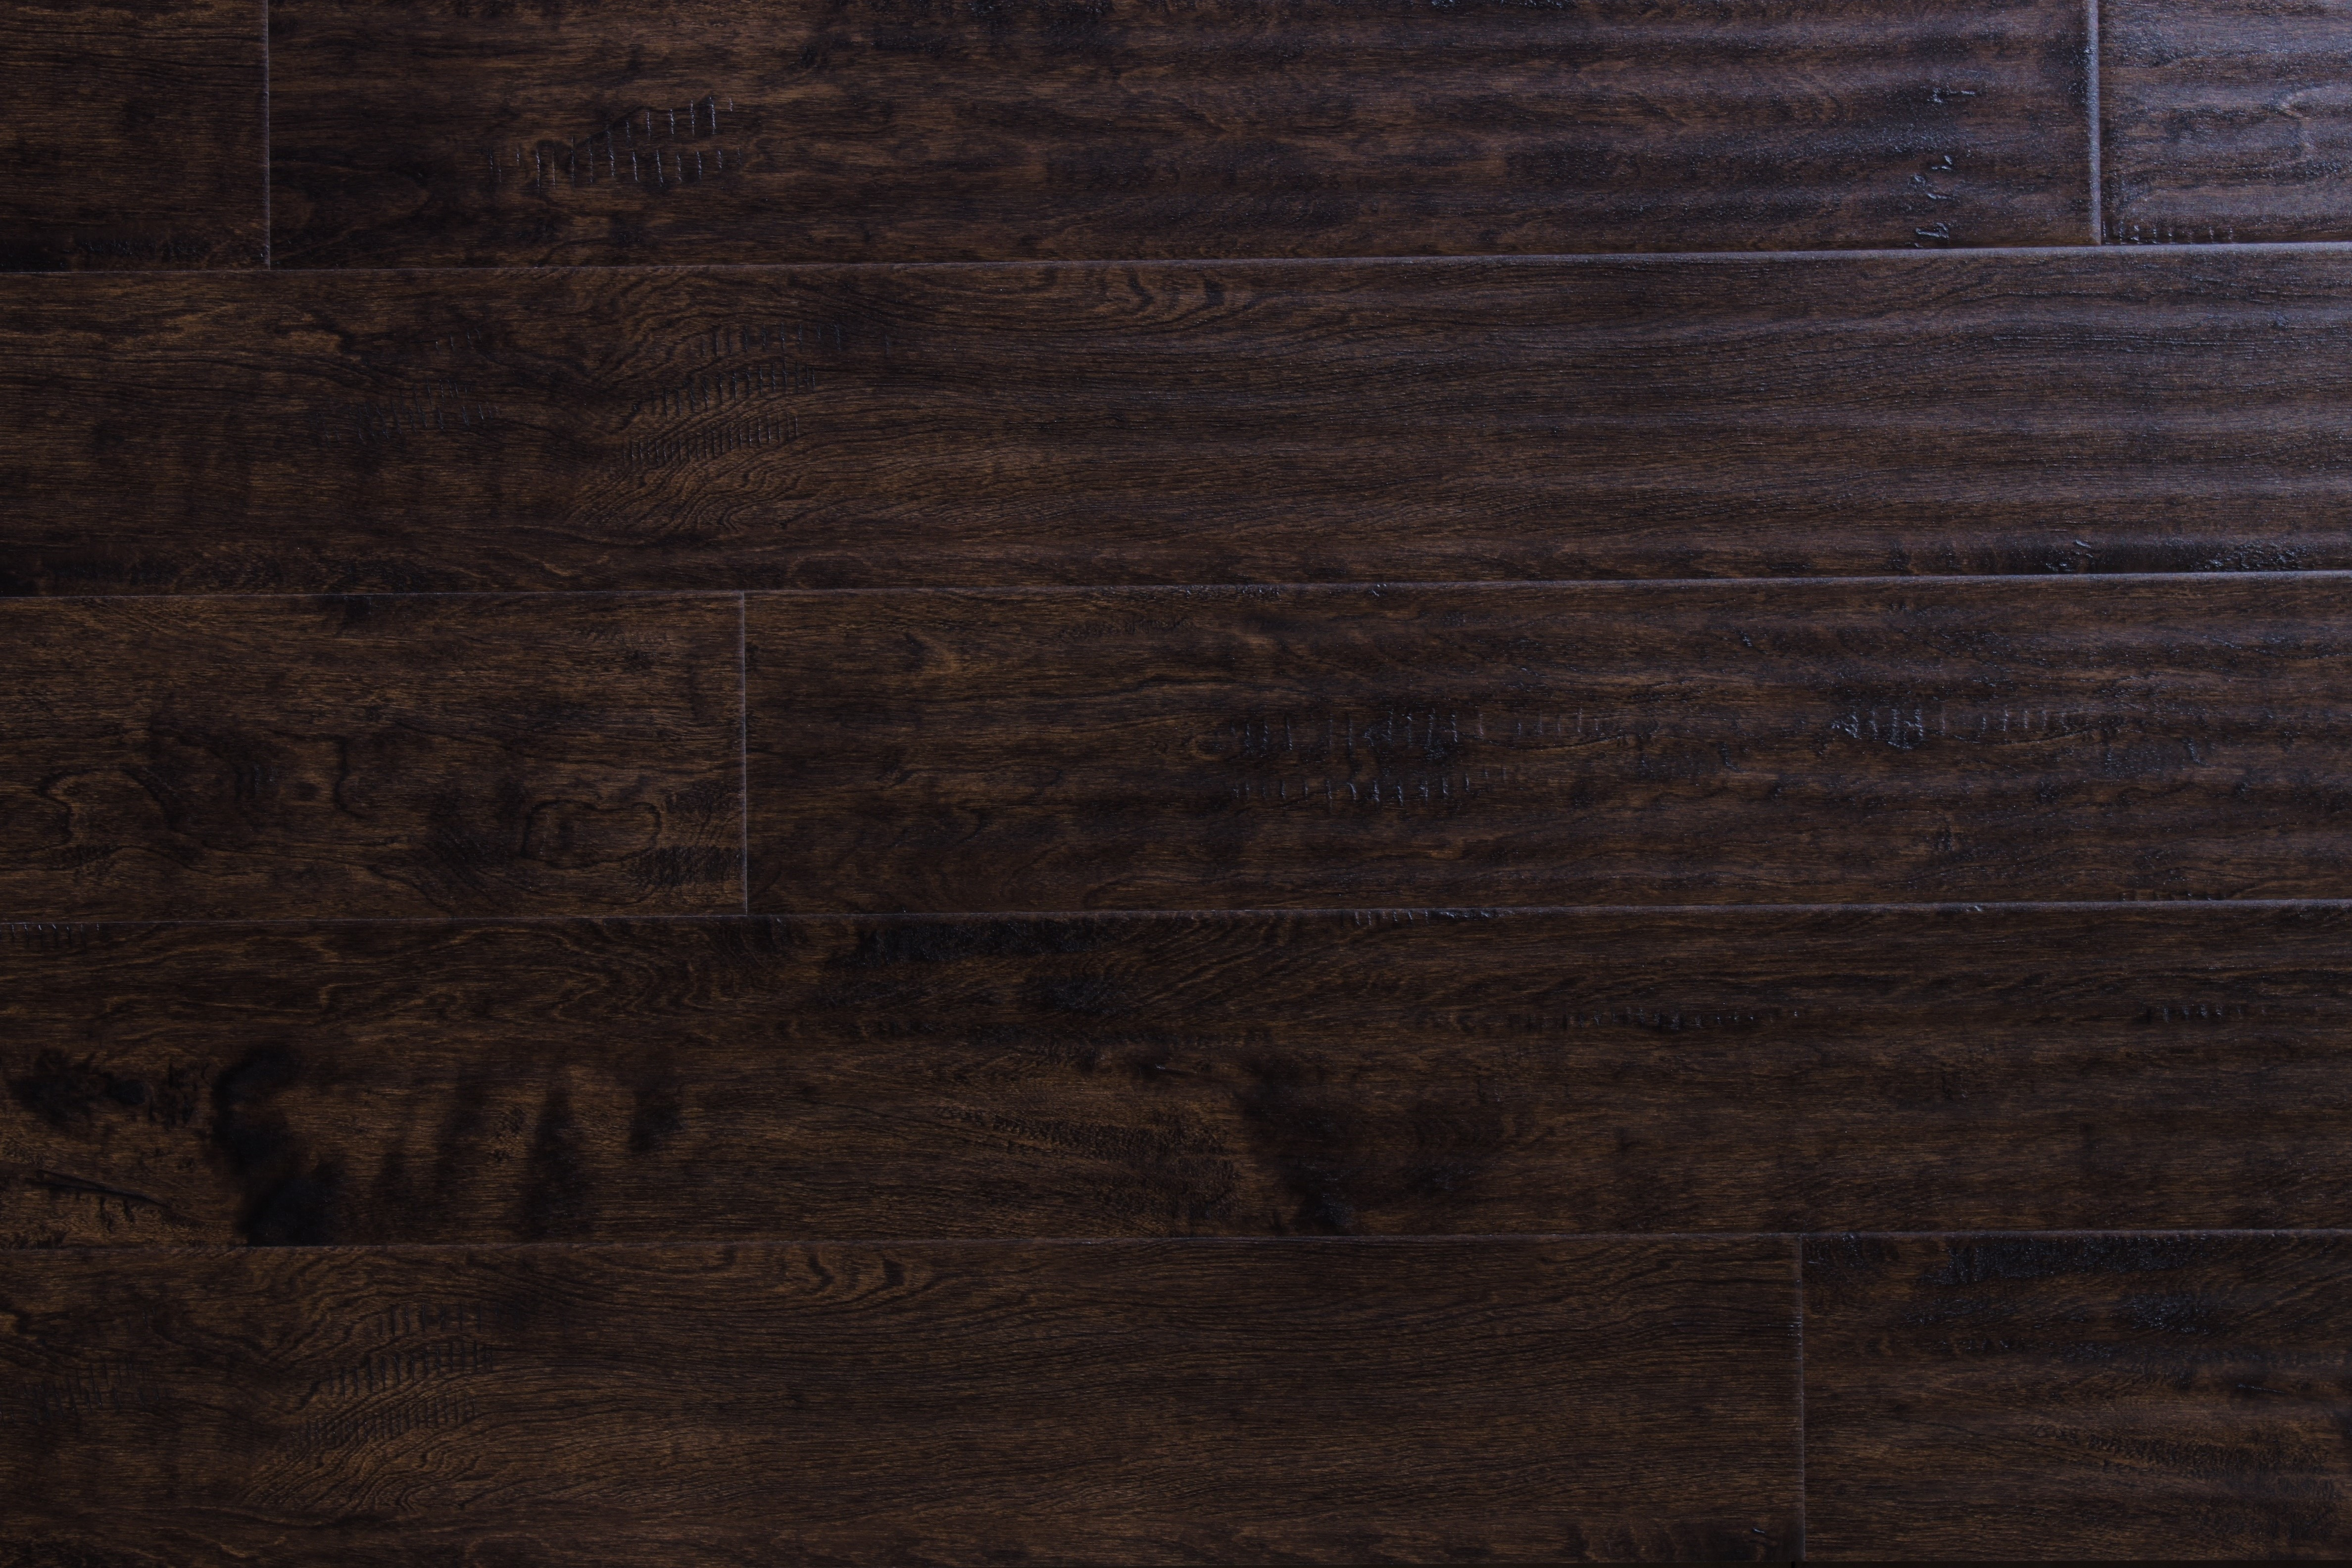 17 Fabulous Bruce solid Hardwood Flooring Reviews 2024 free download bruce solid hardwood flooring reviews of wood flooring free samples available at builddirecta within tailor multi gb 5874277bb8d3c